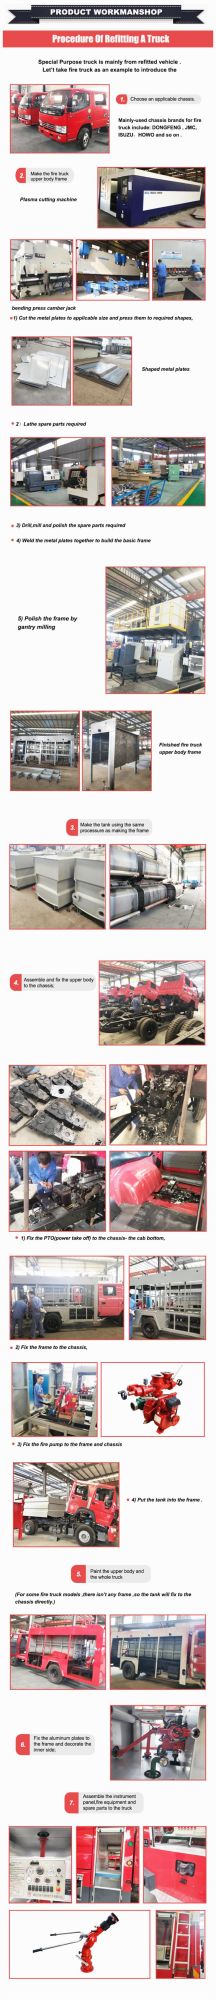 Euro 5 Dongfeng 6X4 20000L Fire Fighting and Rescue Service Vehicles, 6 Wheel Fire Truck, 20ton Water Sprinkler Fire Truck